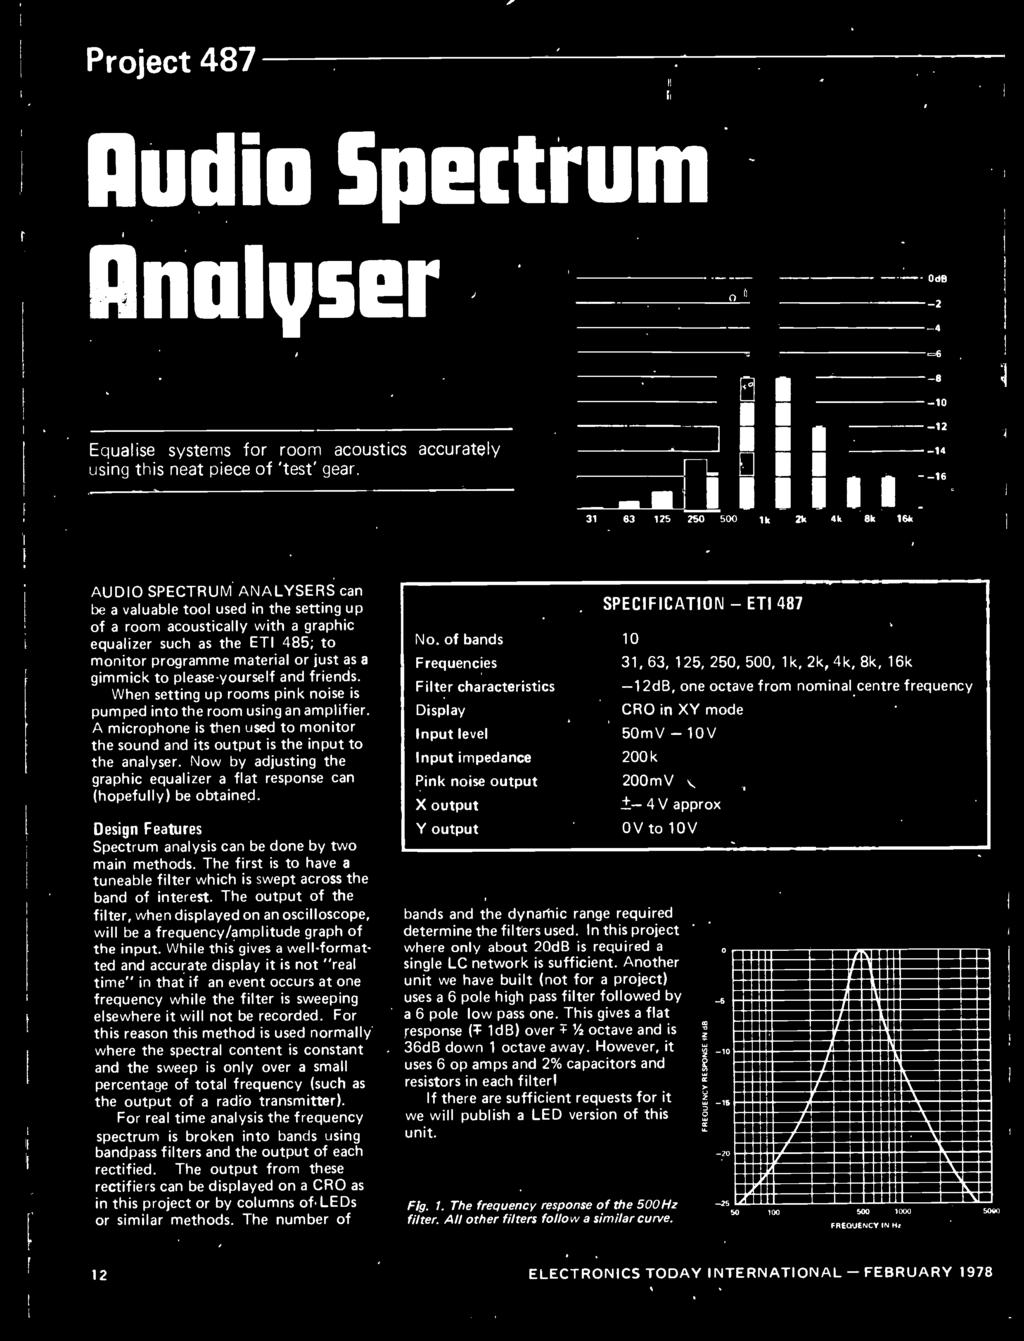 Design Features Spectrum analysis can be done by two main methods. The first is to have a tuneable filter which is swept across the band of interest.